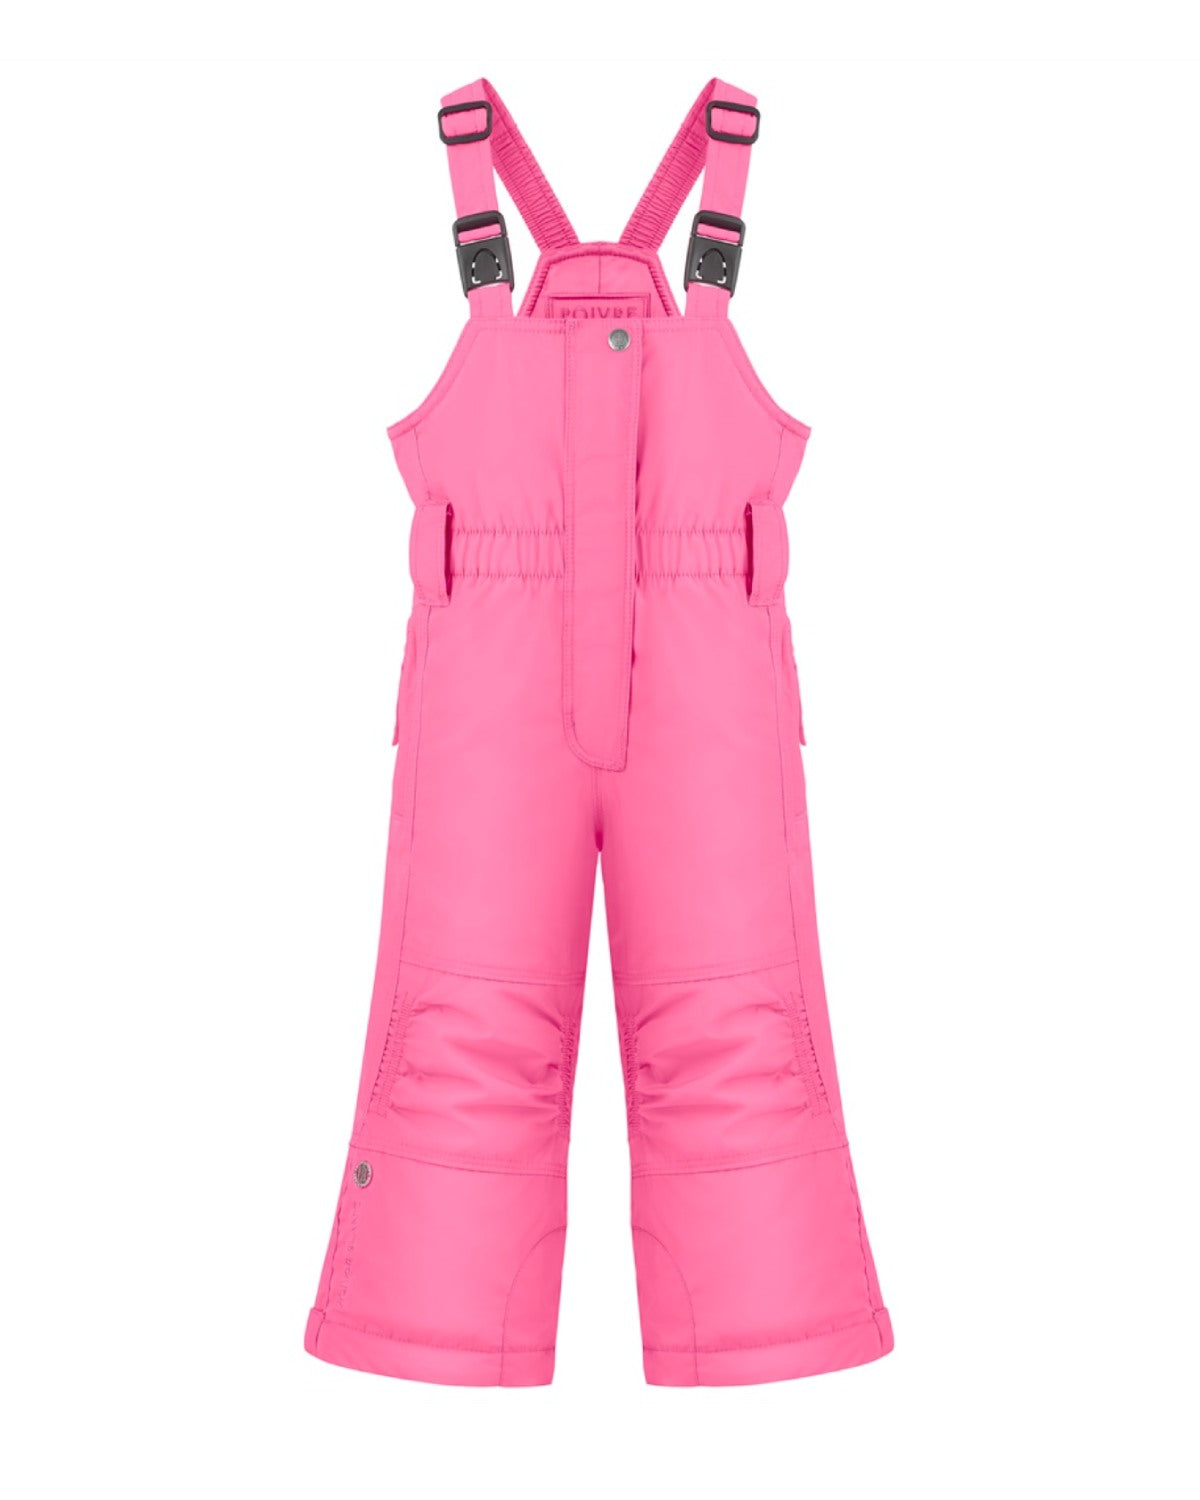 Ski Overall Girl, Poivre-Blanc Blue size 18 months new with tag